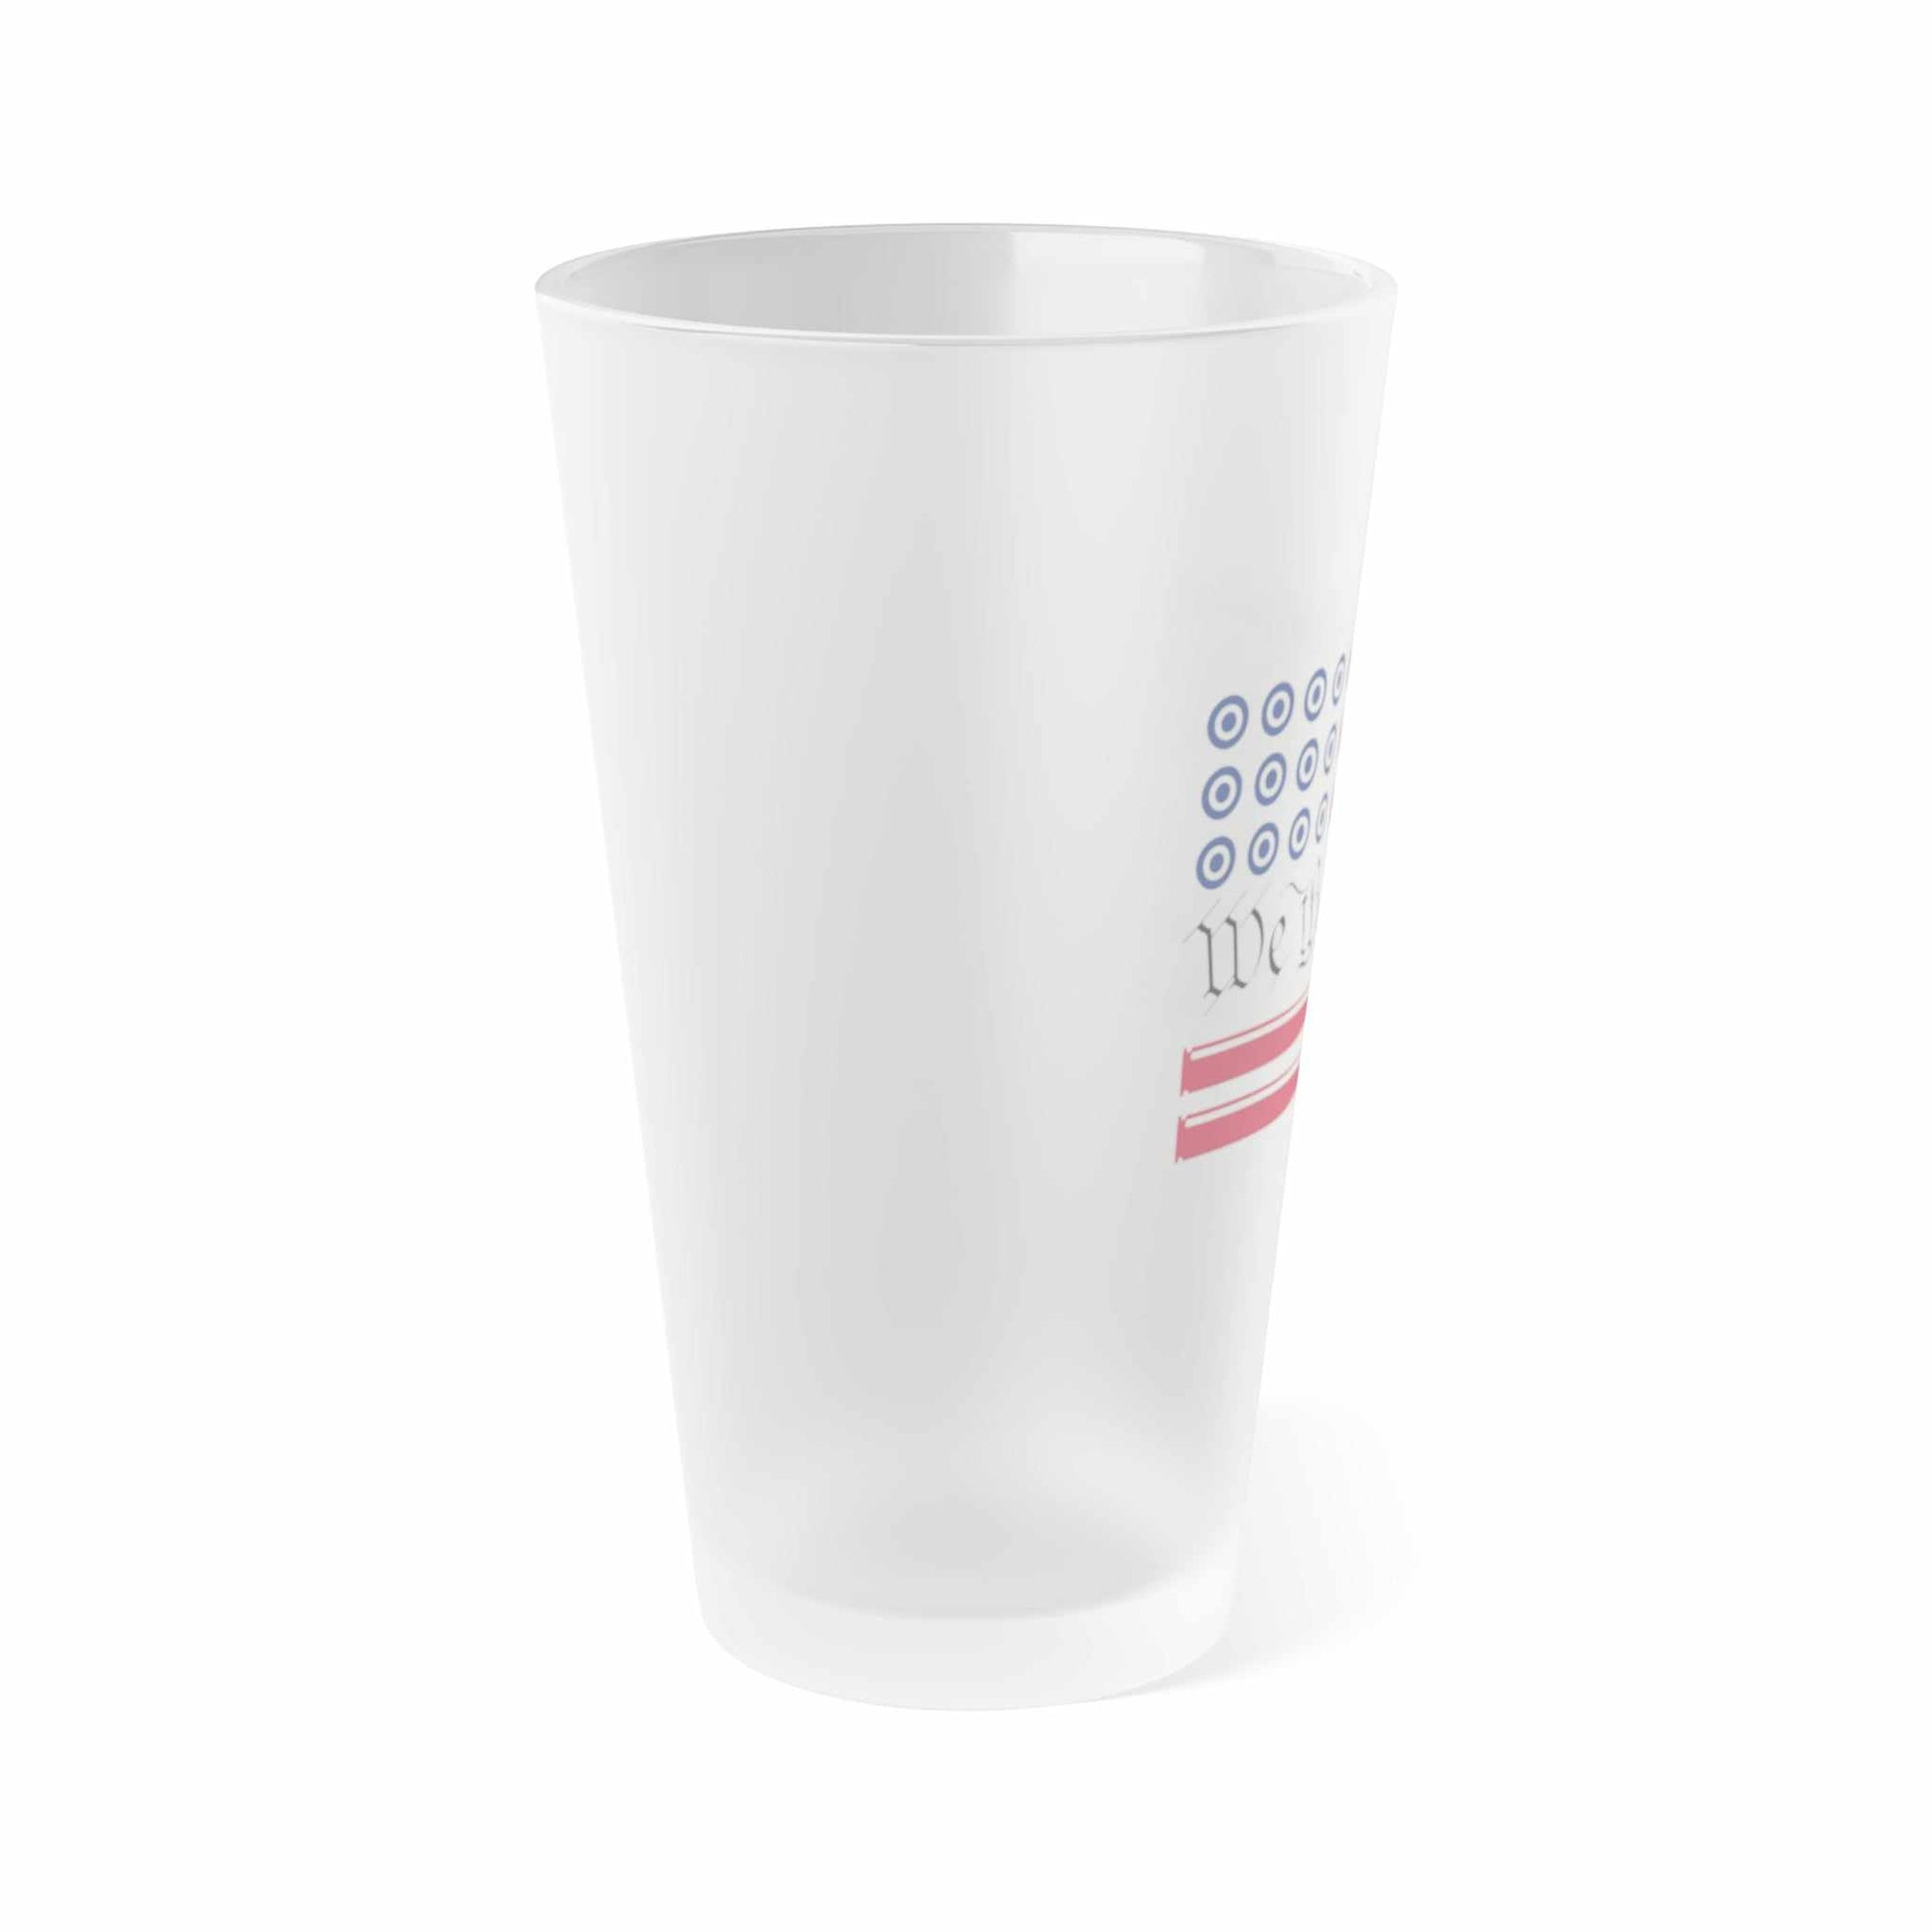 We The People -Frosted Pint Glass, 16ozPeople -Frosted Pint Glass, 16oz